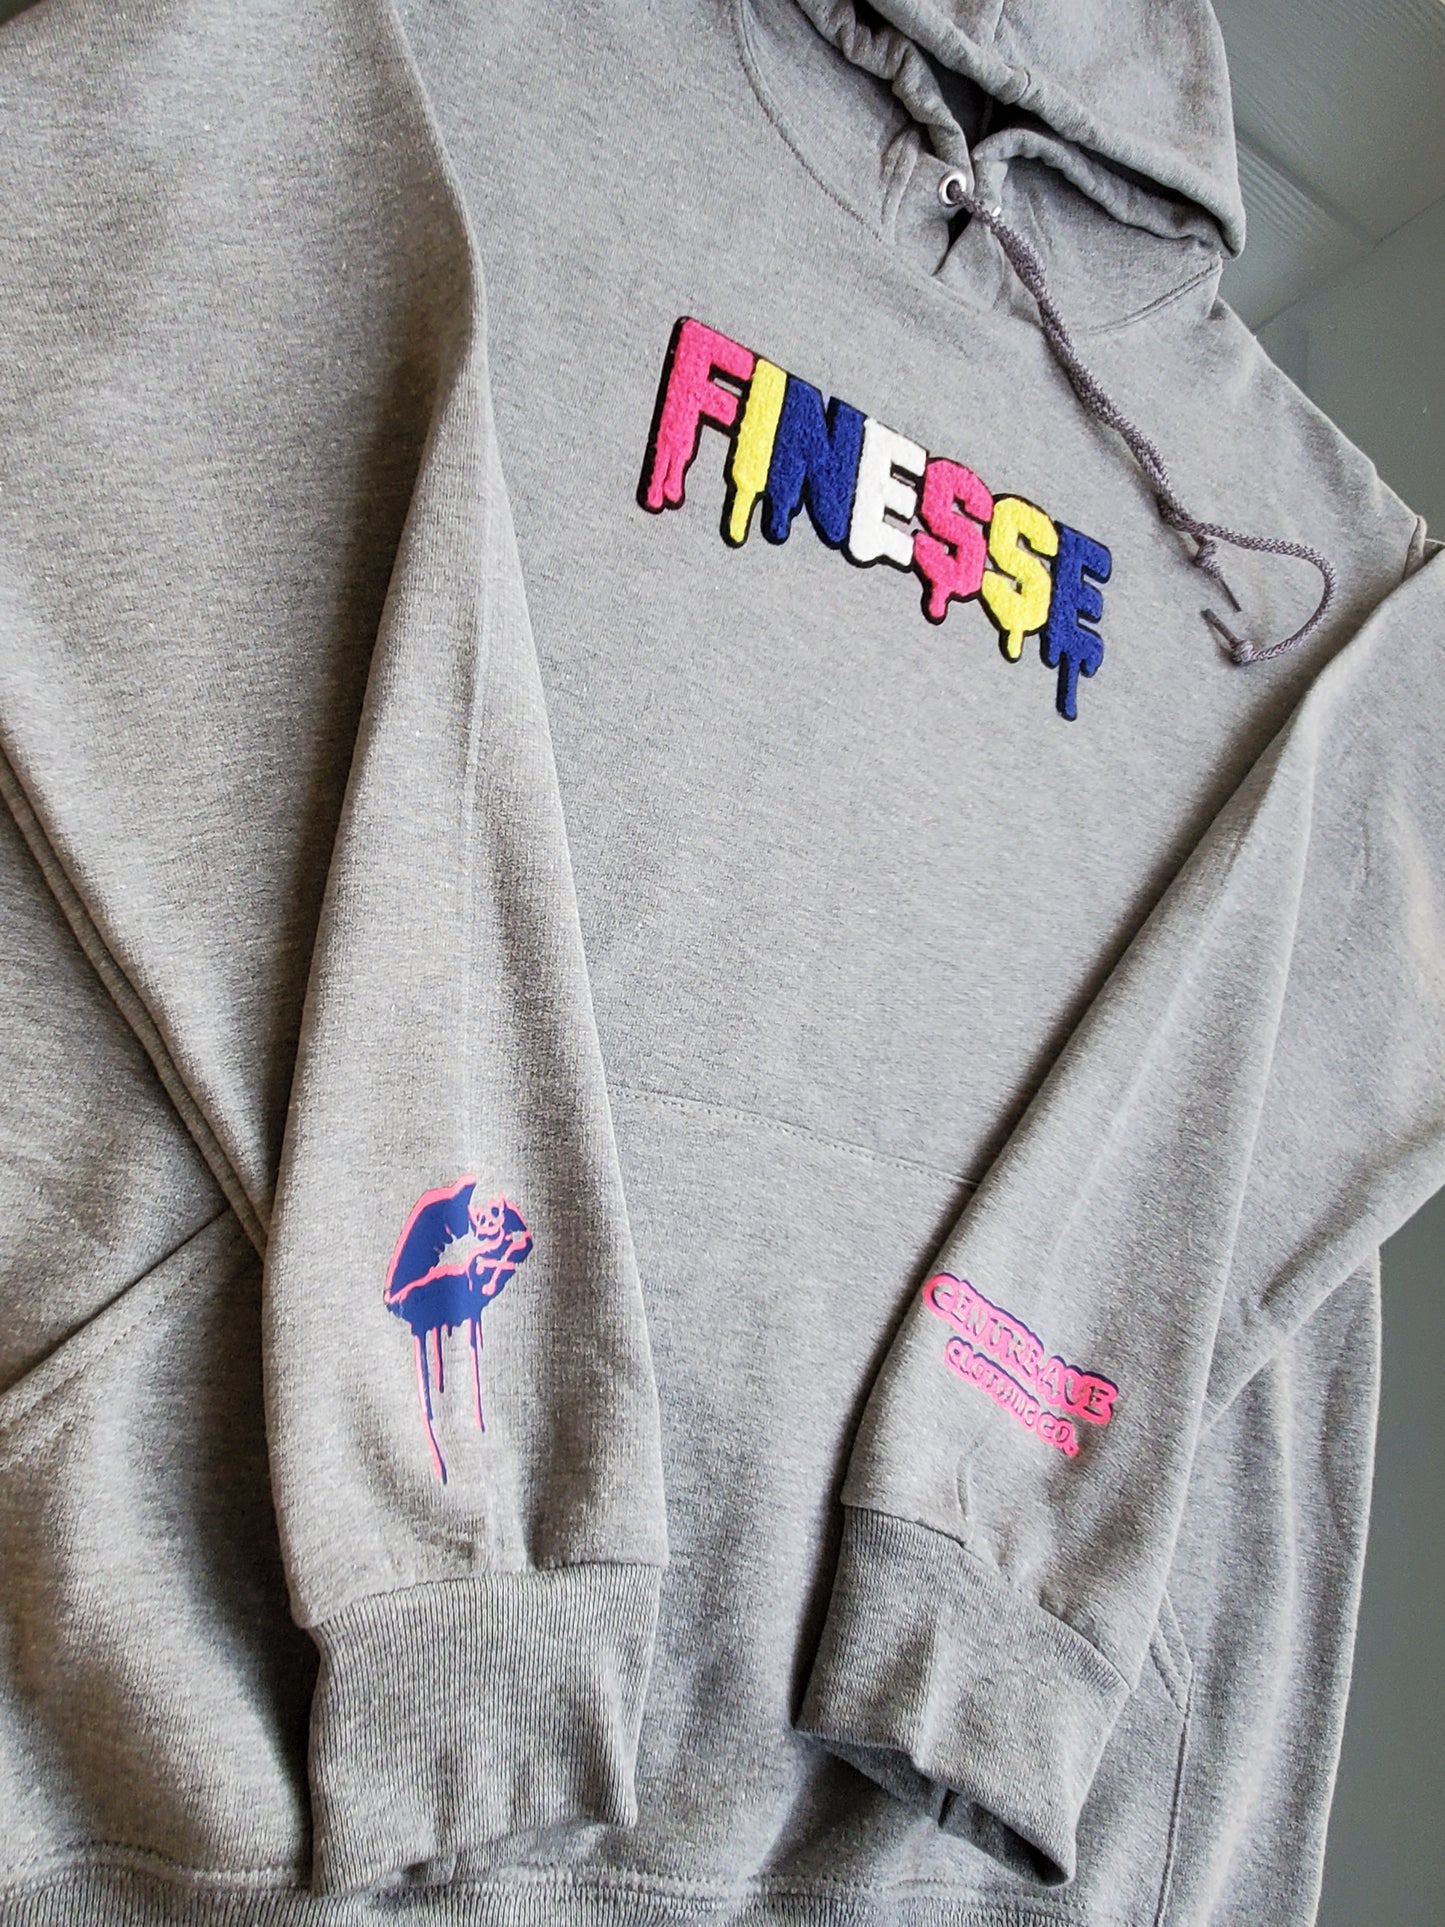 Finesse Women's Hoodie - Centre Ave Clothing Co.